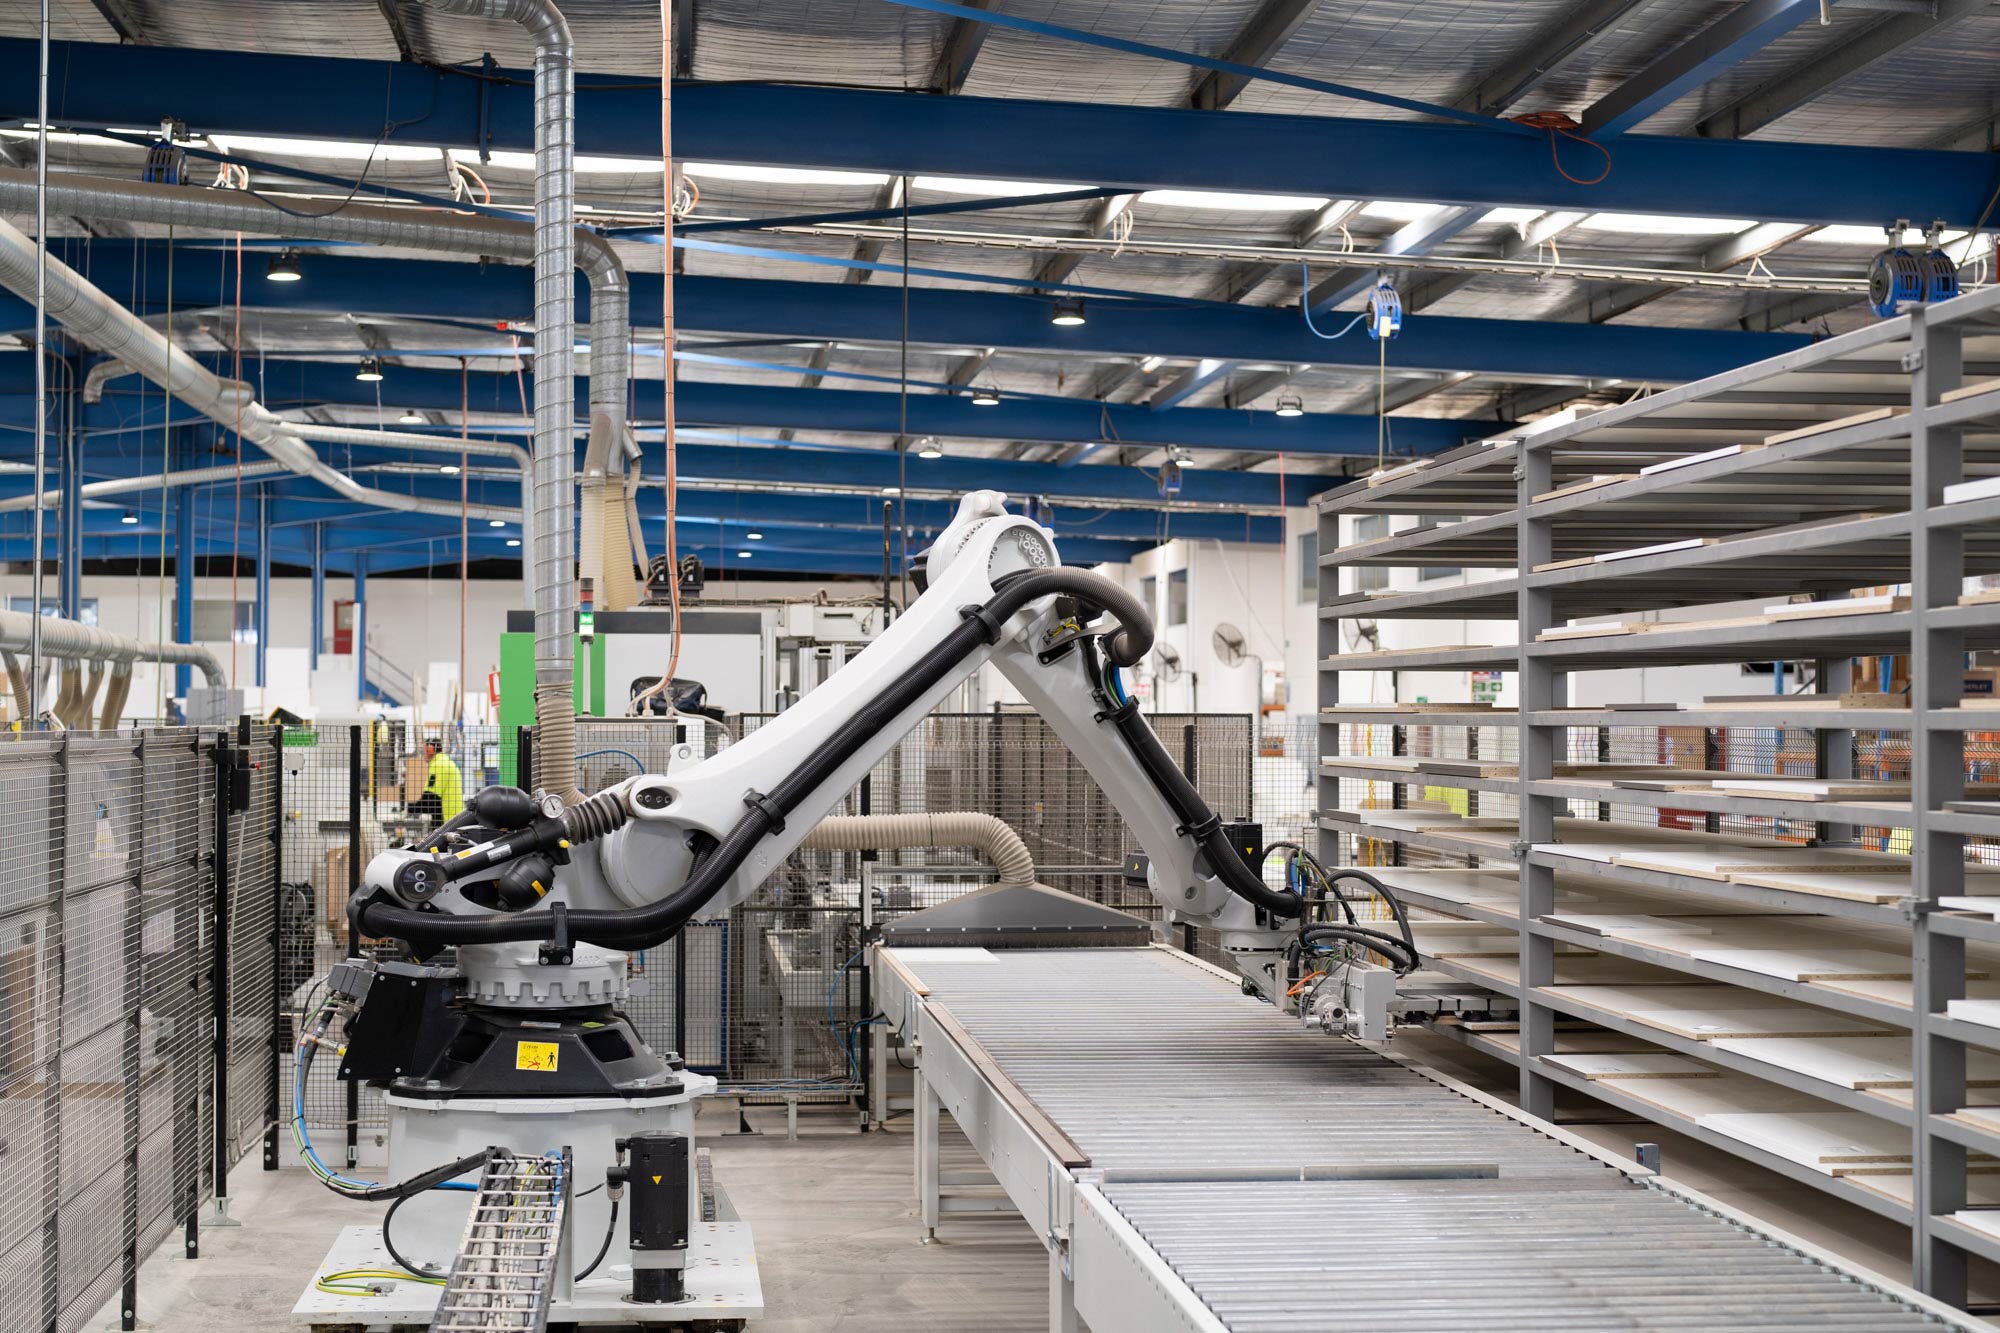 Image of our local state of the art cabinetry manufacturing facility, showing a robot